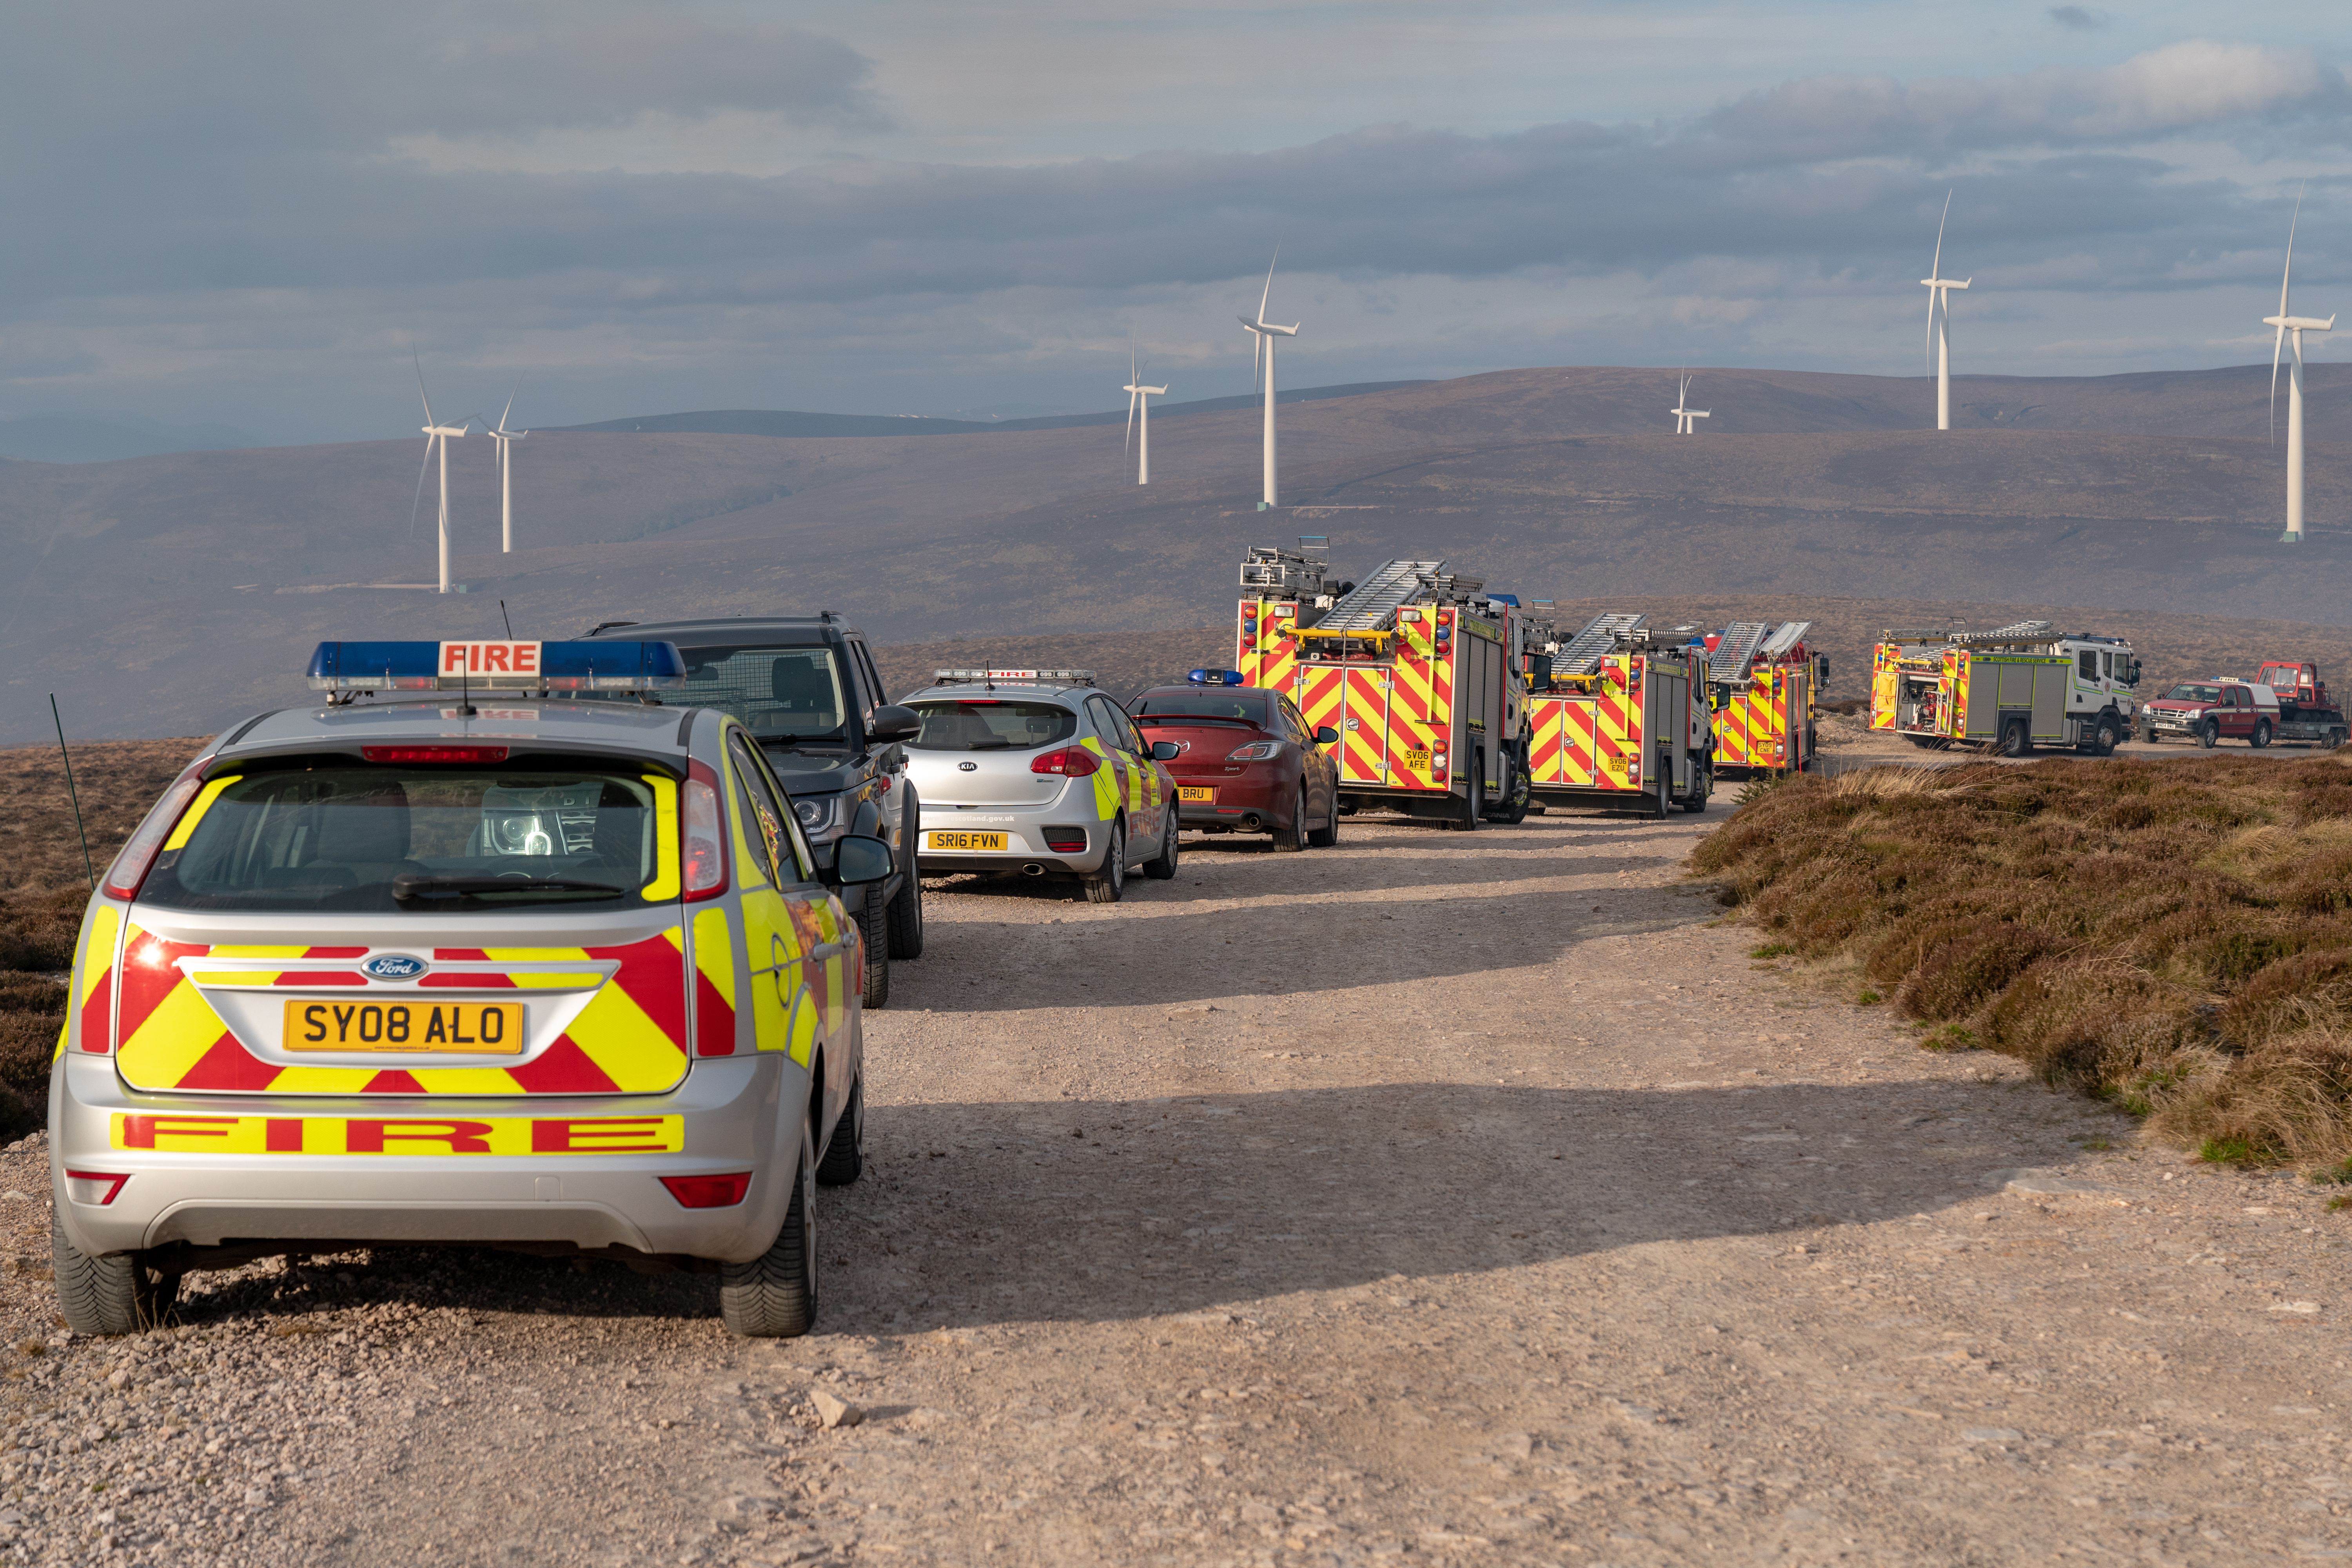 The Fire Units within Pauls Hill Wind Farm, Moray